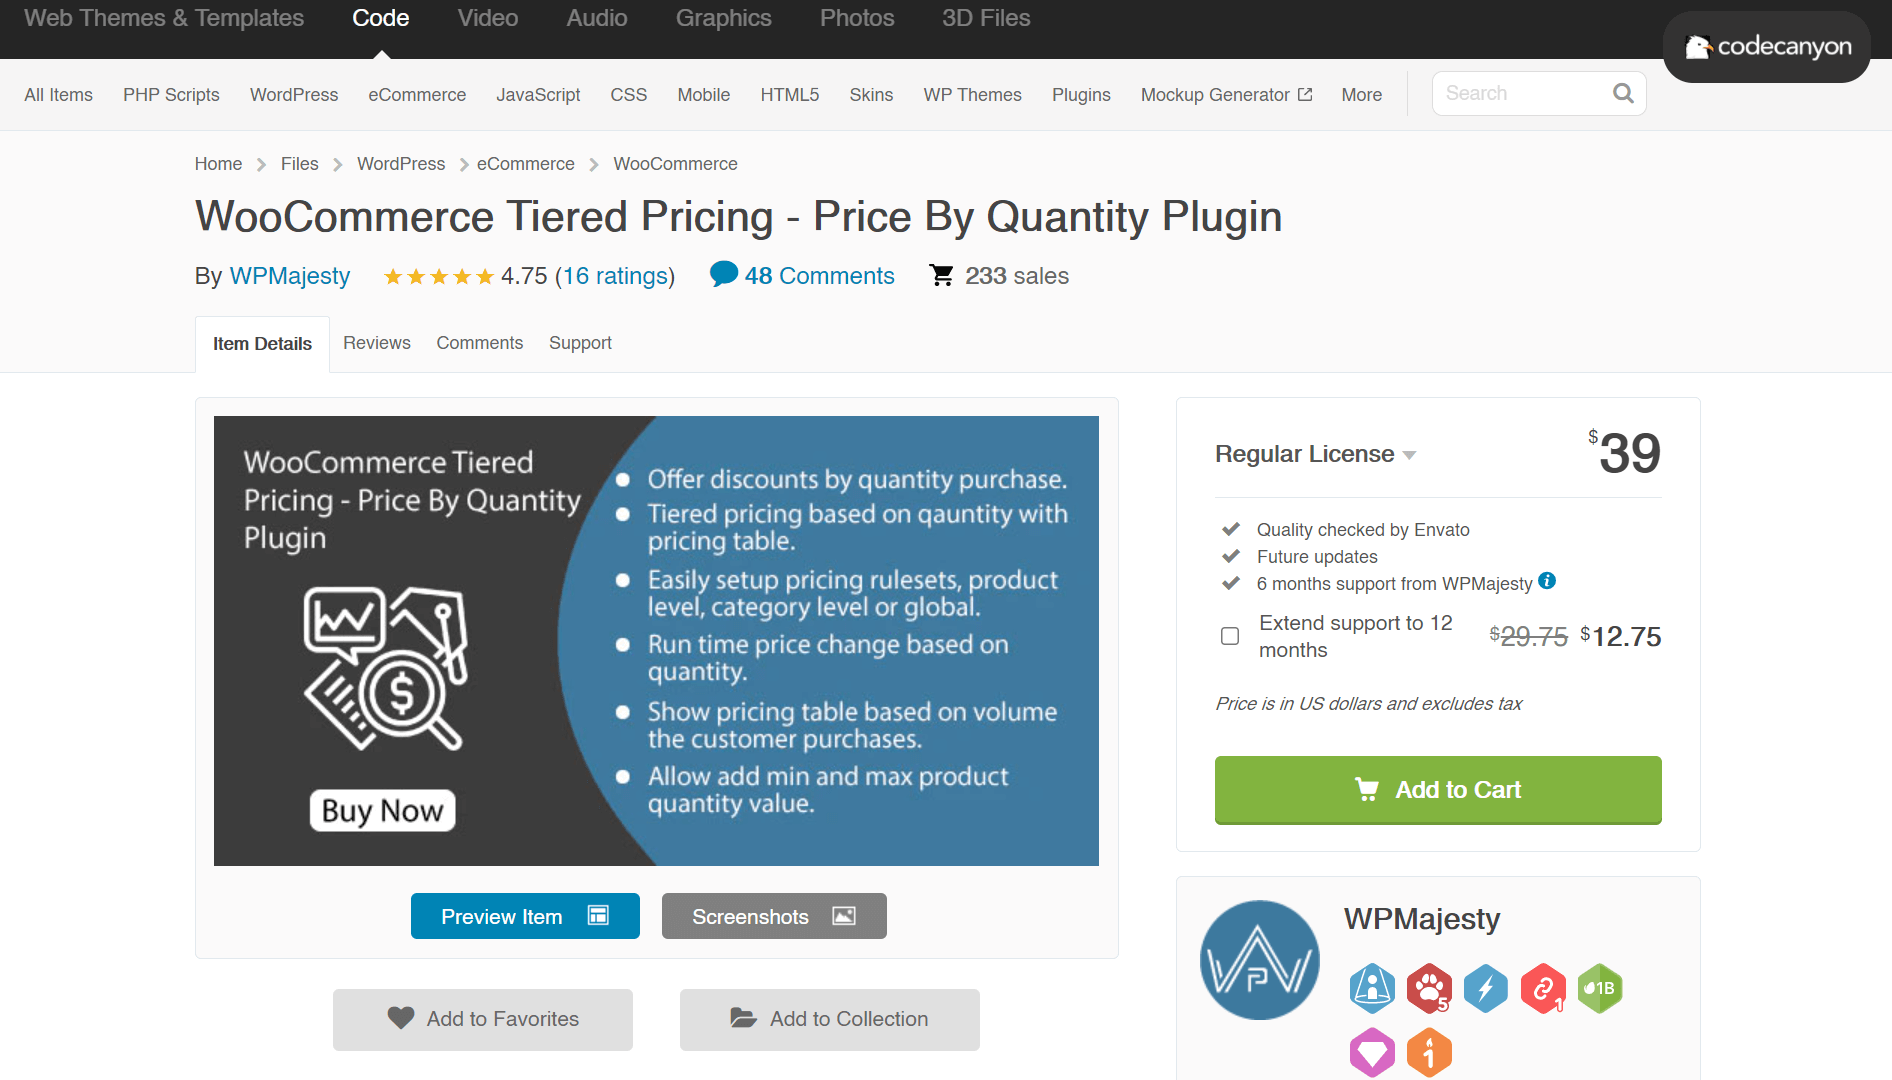 WooCommerce Tiered Pricing – Price by Quantity Plugin